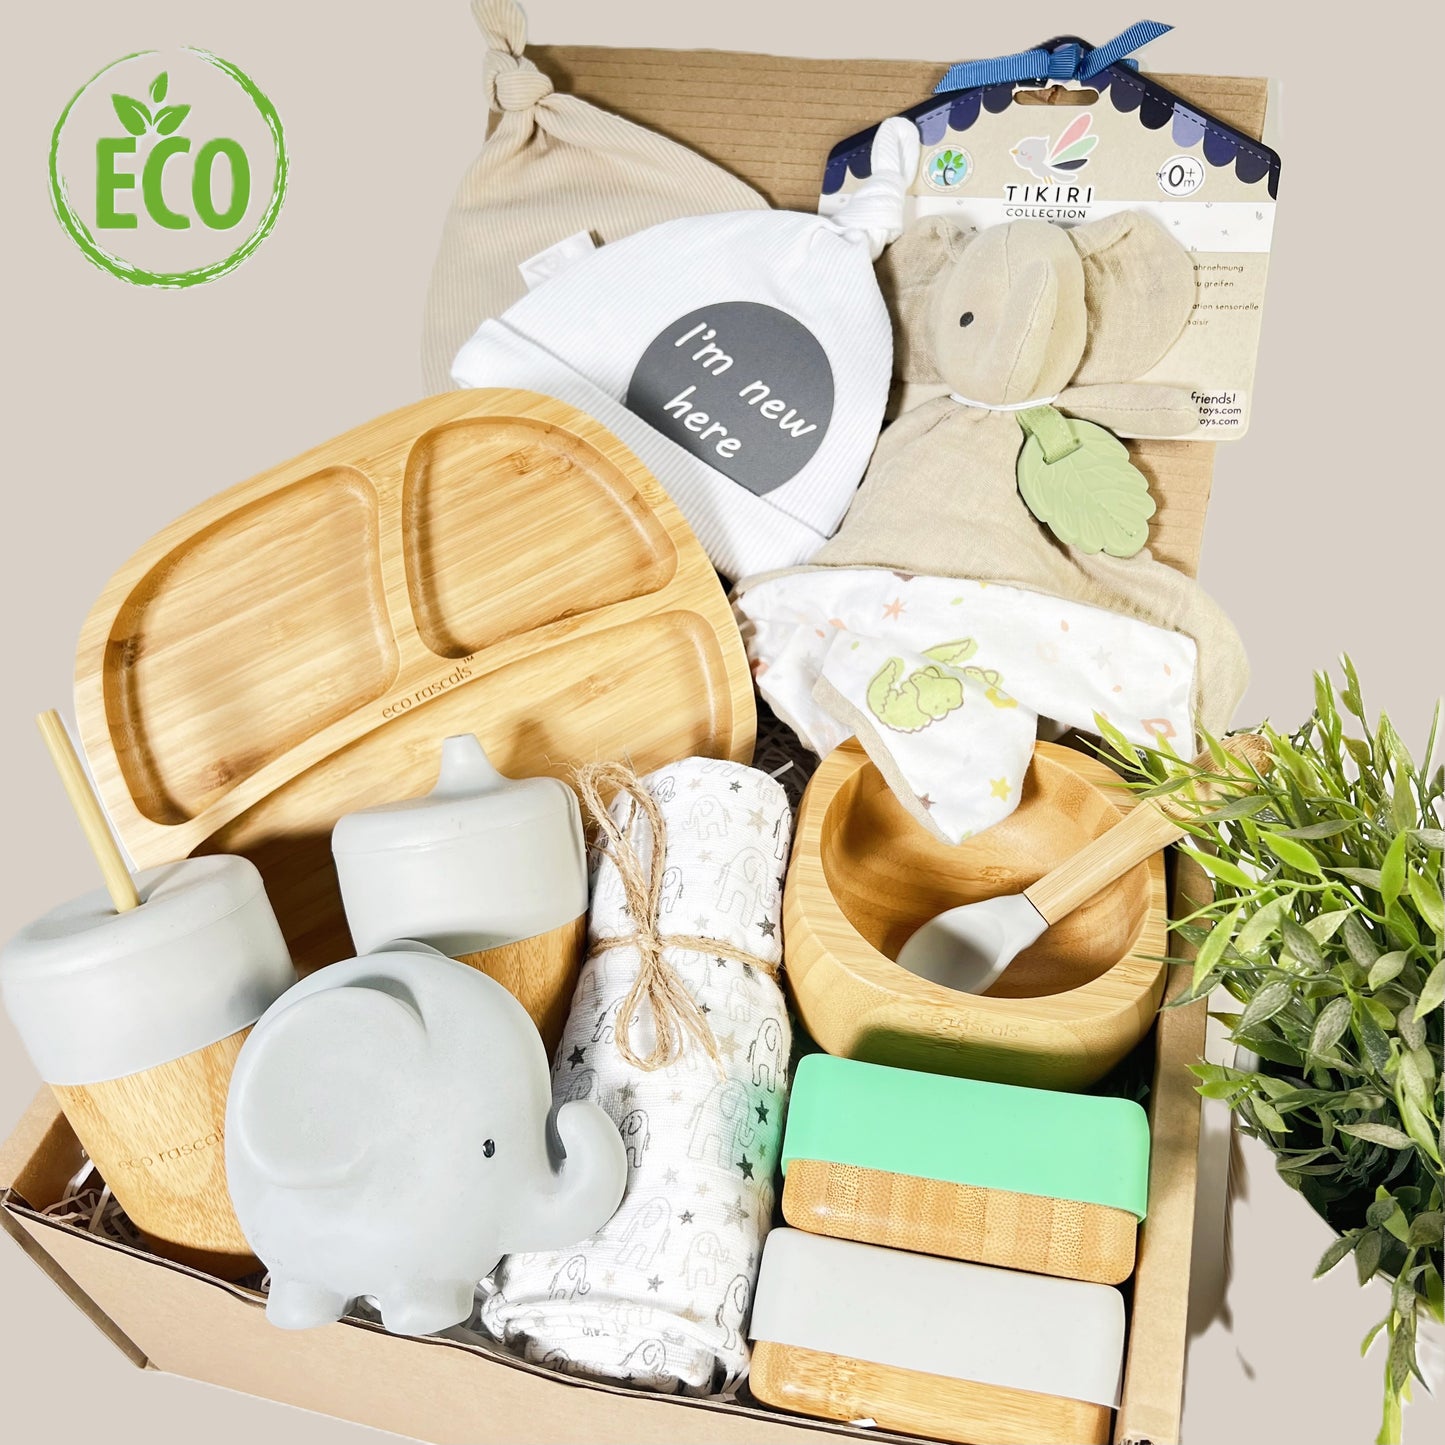 Eco friendly new baby weaning gift containing 6 bamboo baby feeding items, 1 x organic cotton elephant teether comforter, a large cotton muslin square, a natural rubber teething elephant and bath toy, 2 baby knots hats and a baby photography plaque.